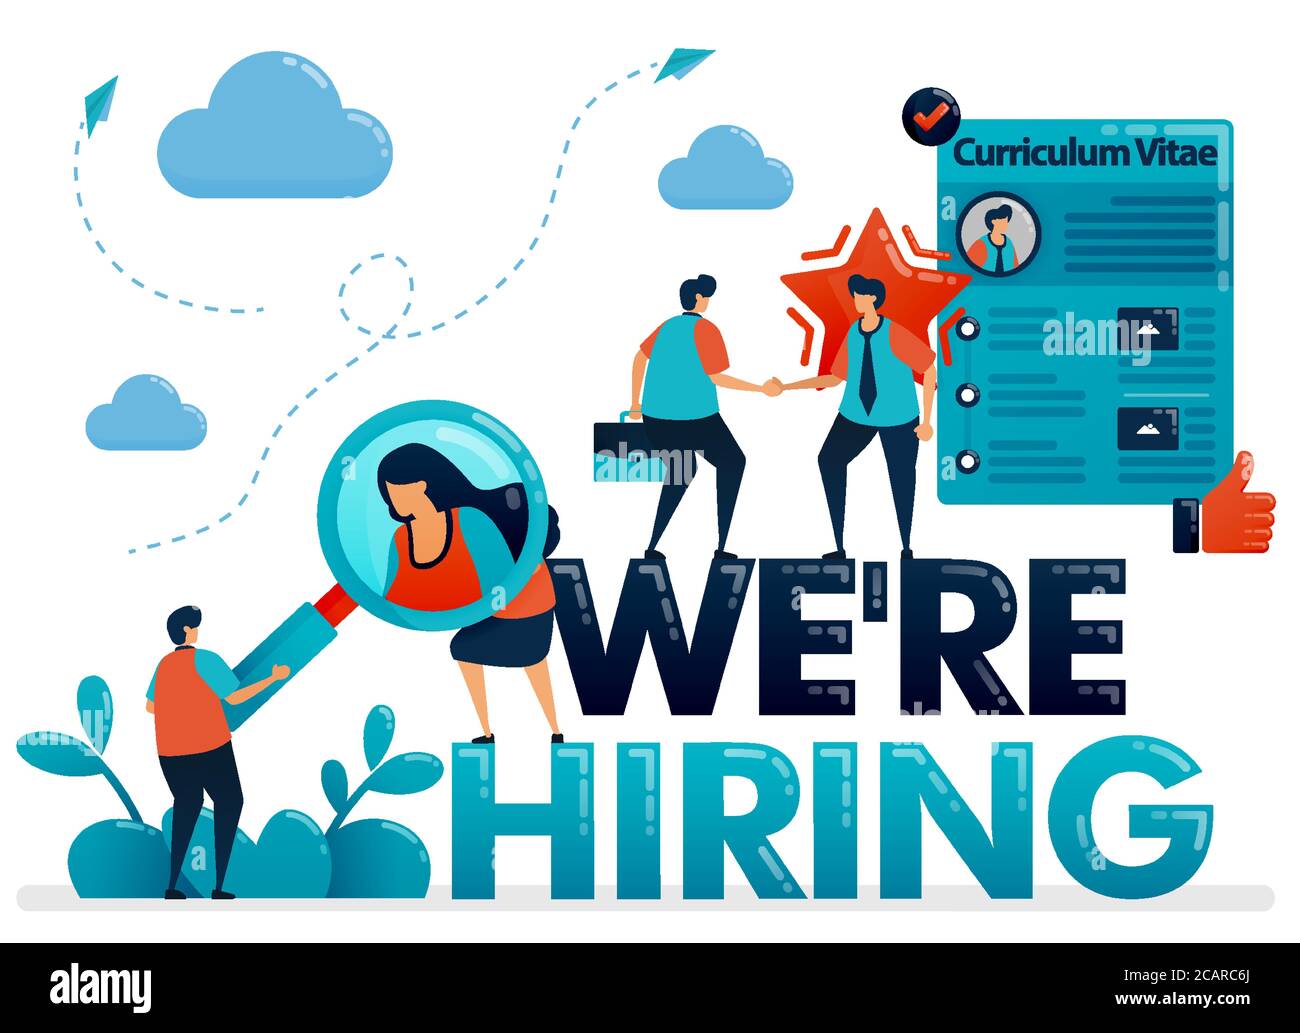 We're hiring posters with curriculum vitae profile to apply for job. Open recruitment and vacancies, get the best talent for company position. Illustr Stock Vector